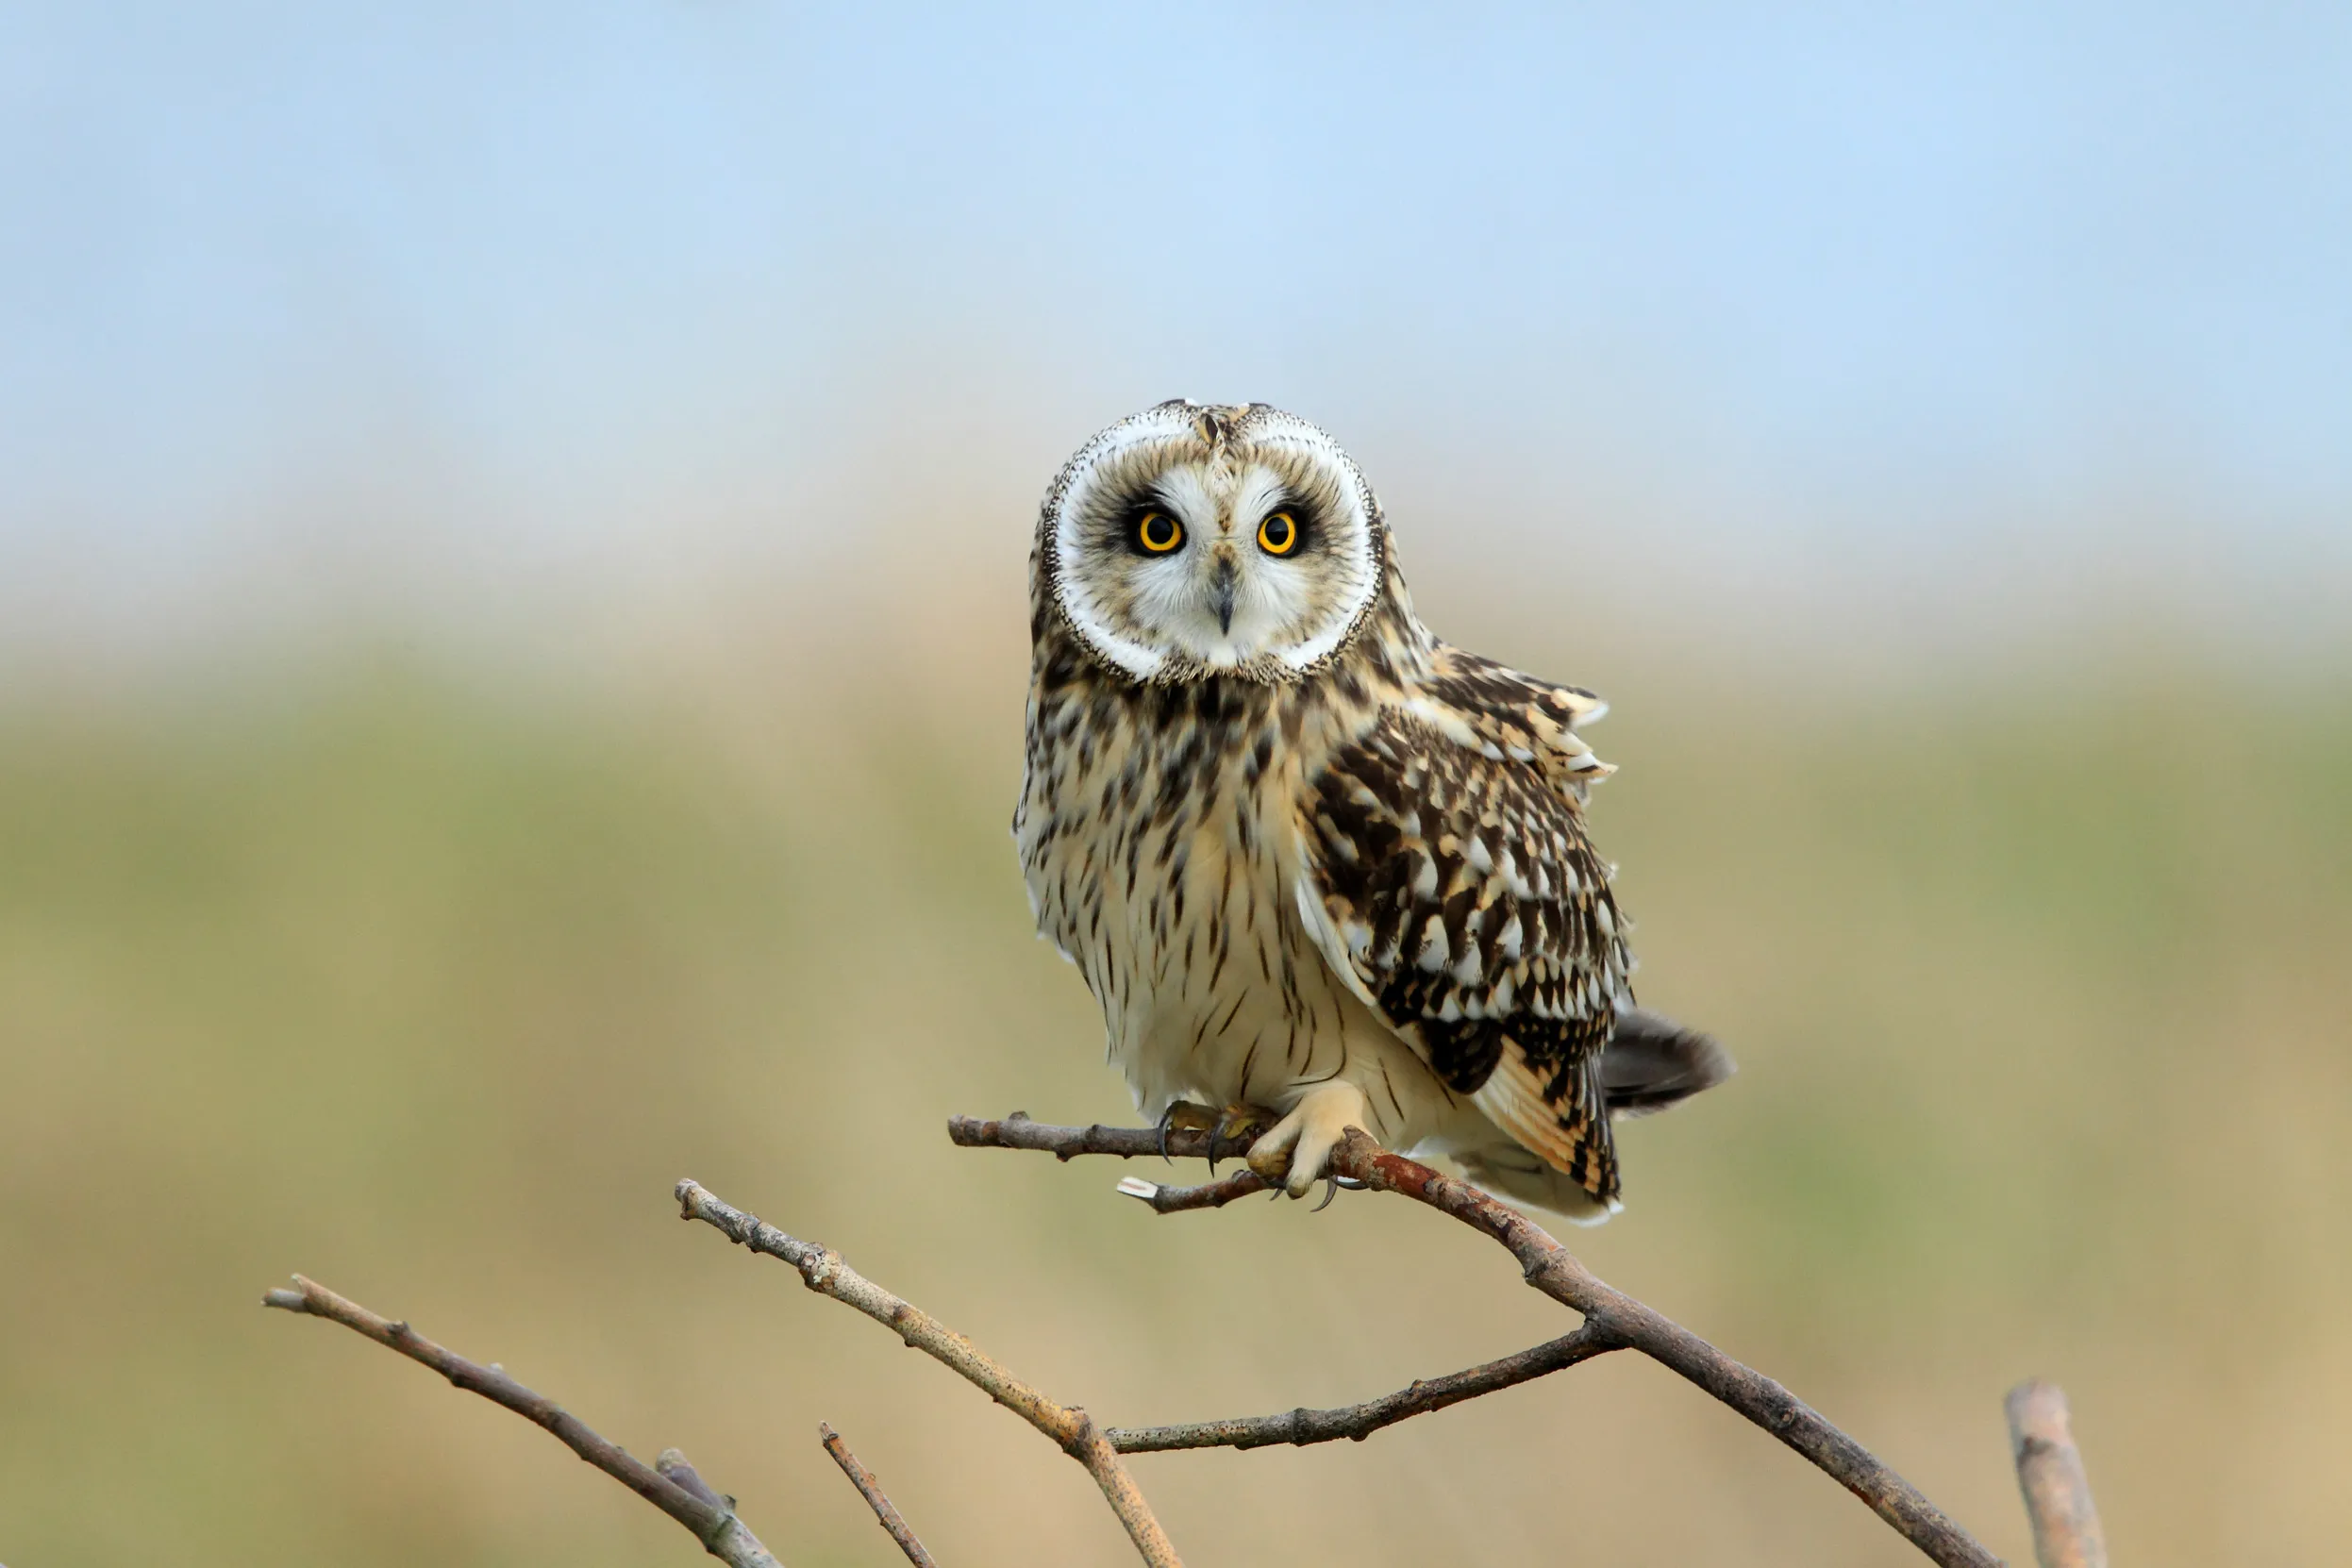 Short-eared Owl perched on a branch.